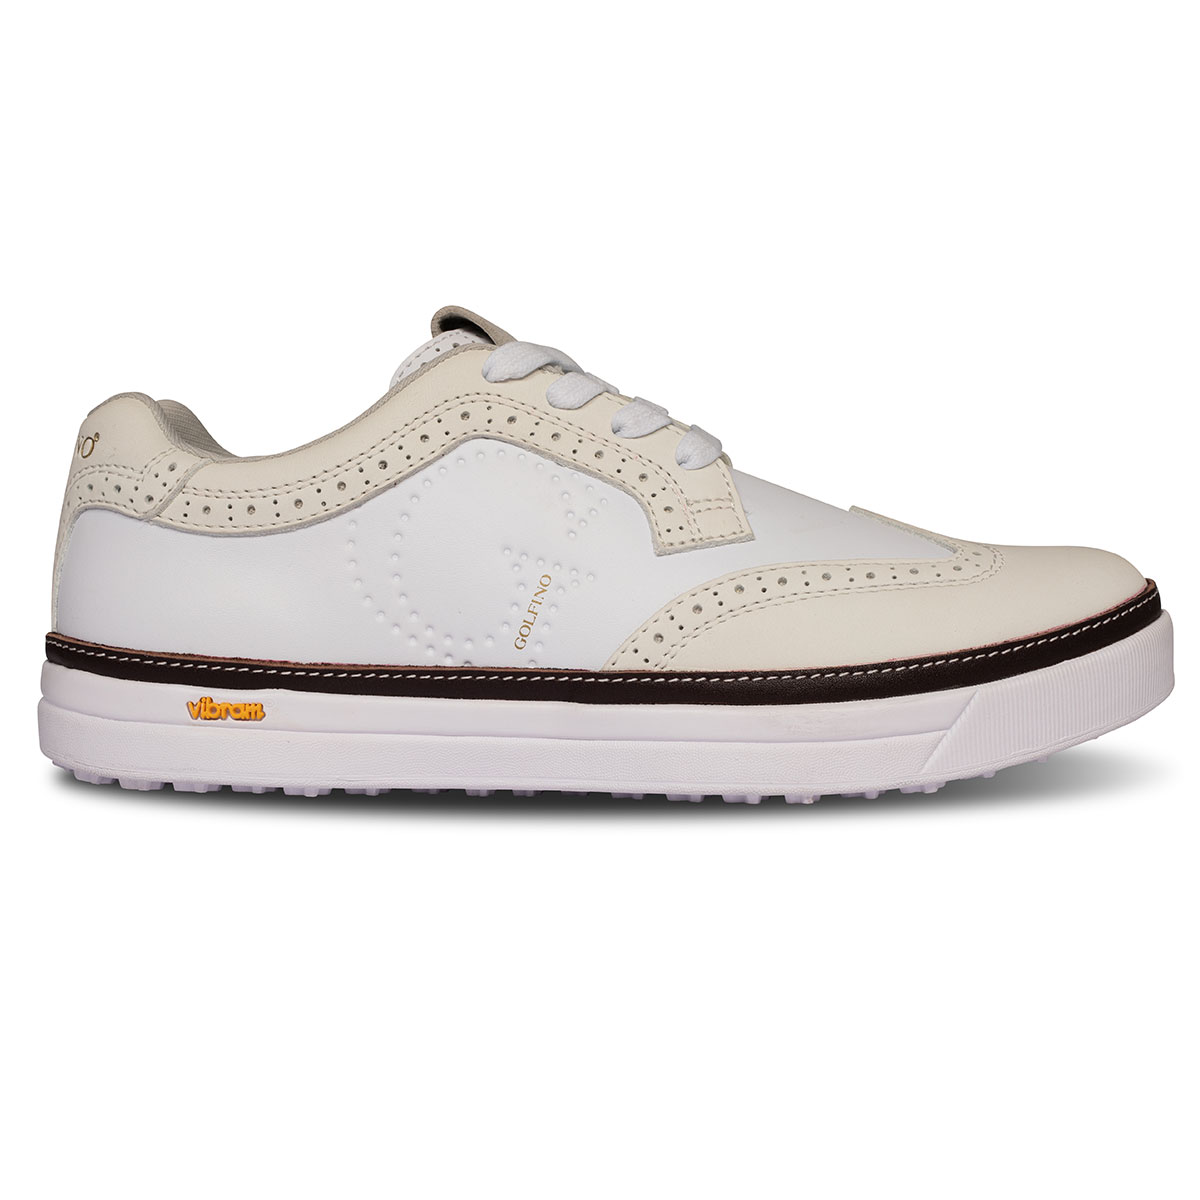 Ladies' golf shoes Brogue style